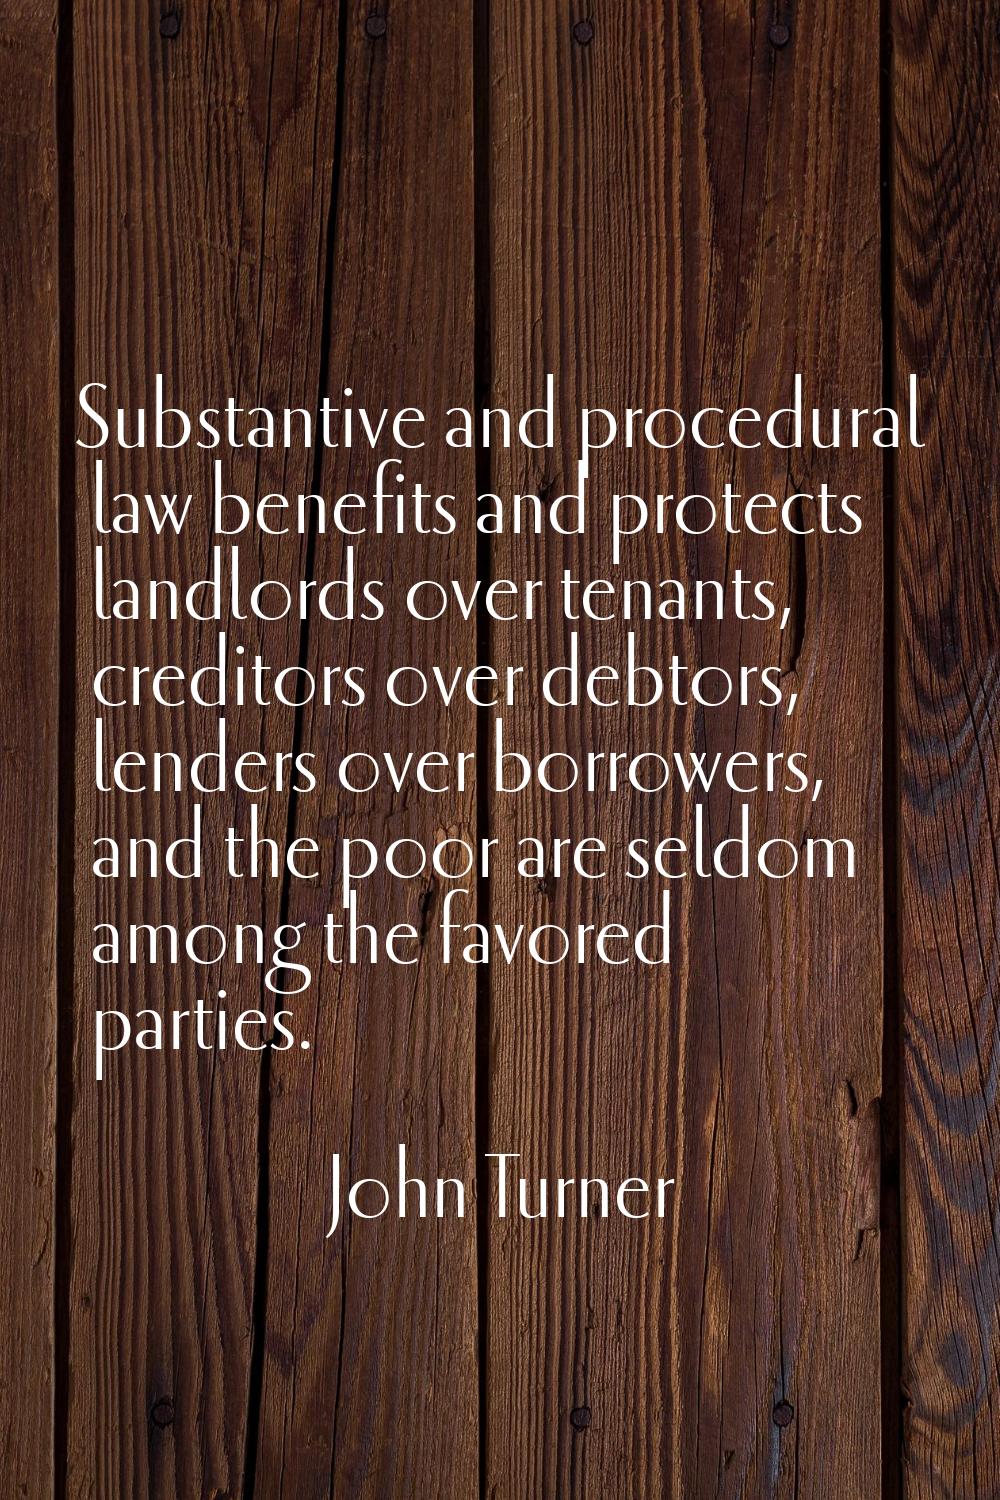 Substantive and procedural law benefits and protects landlords over tenants, creditors over debtors